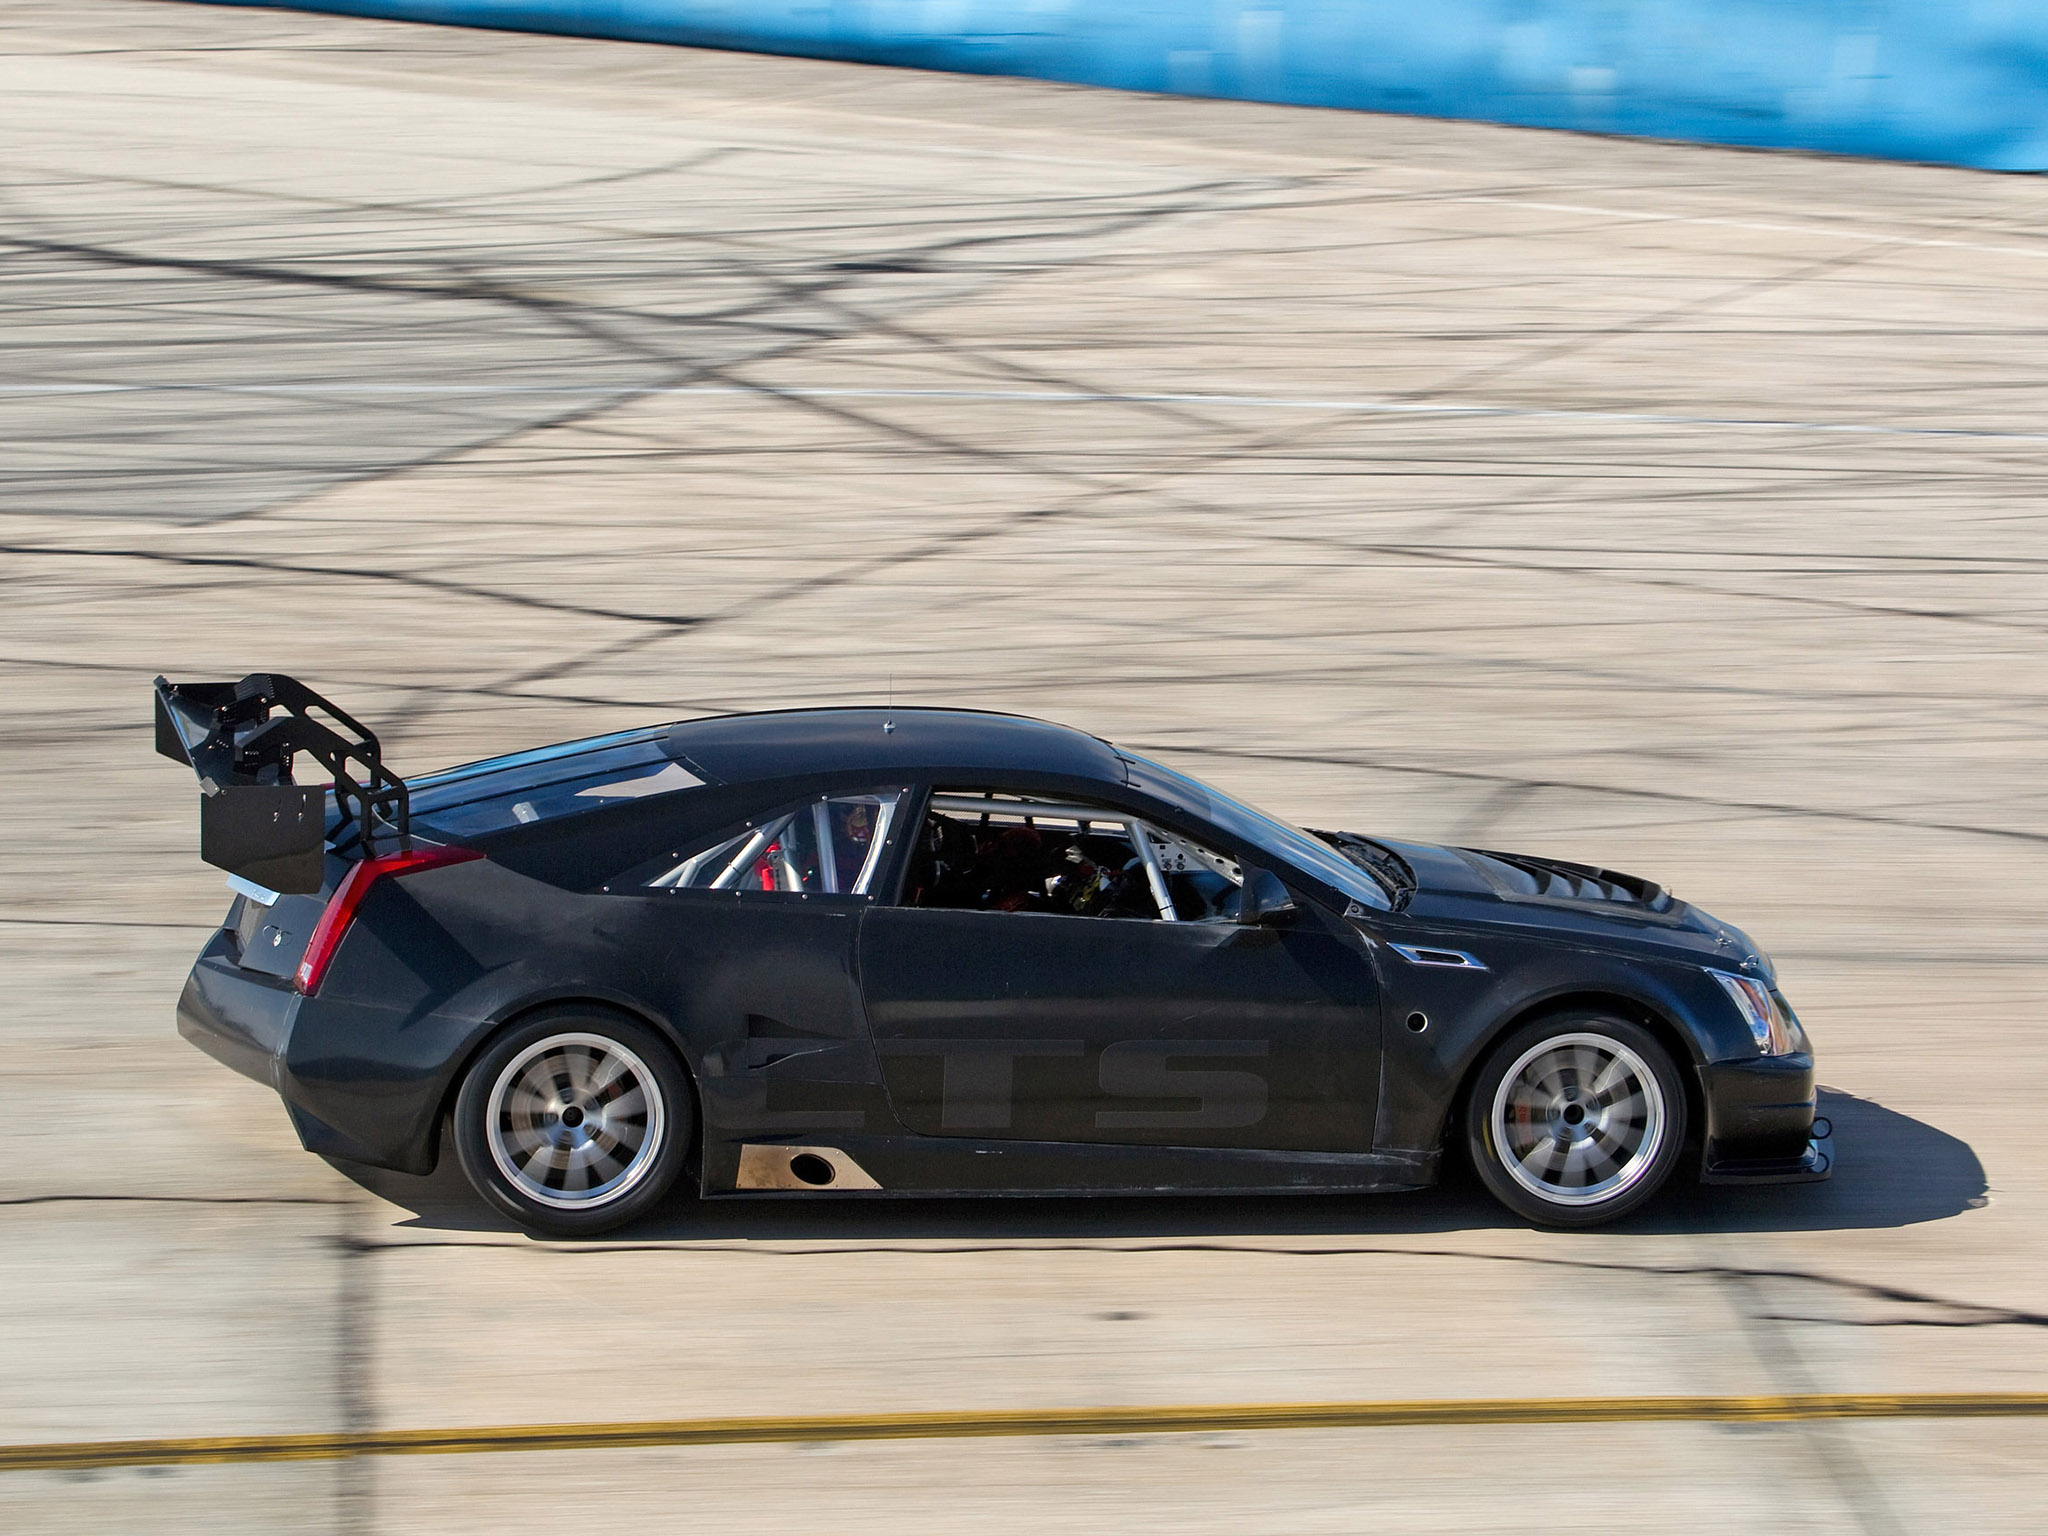 2011, Cadillac, Cts v, Racing, Coupe, Race, Muscle Wallpaper